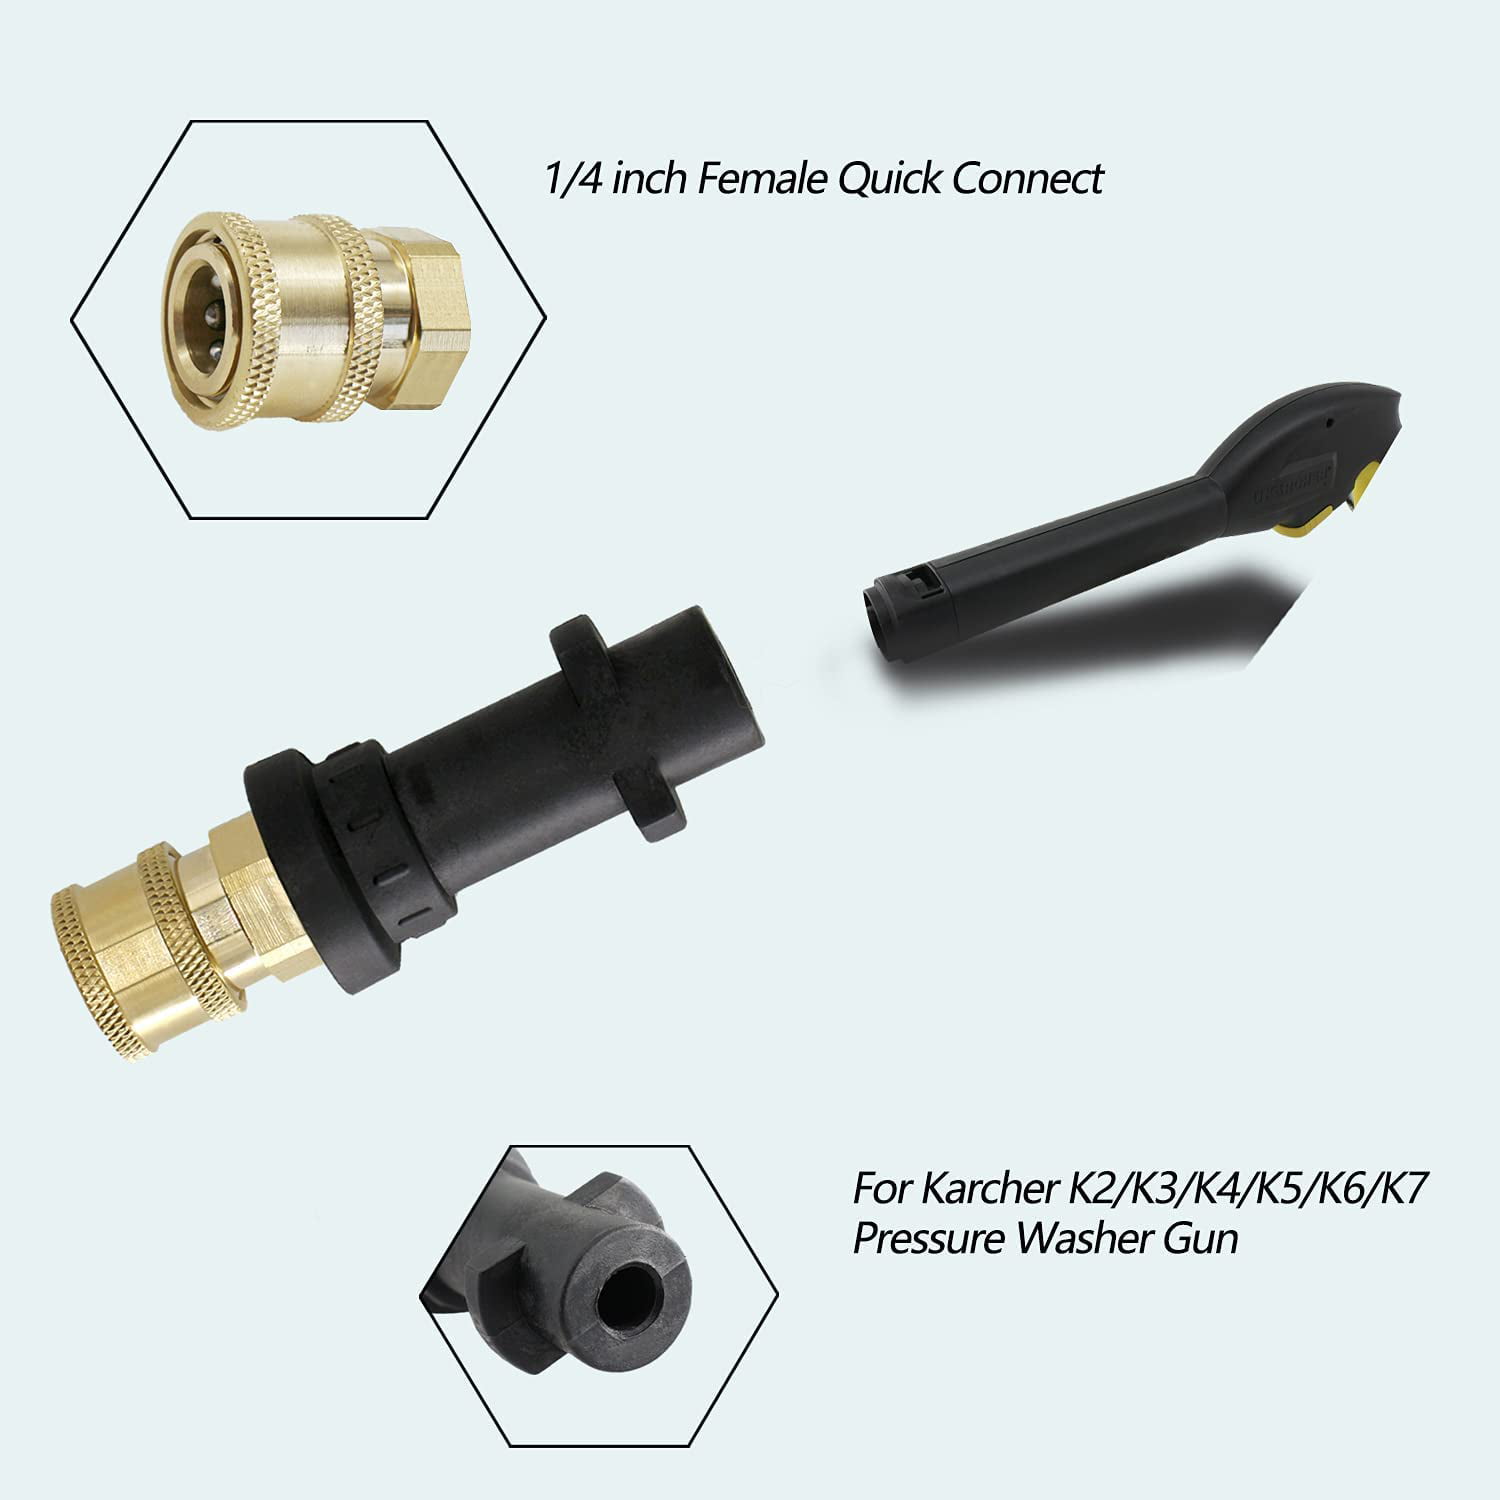 Details about   1/4'' Quick Connect To Pressure Washer Adapter Kit 5 Nozzles For Karcher LAVOR 